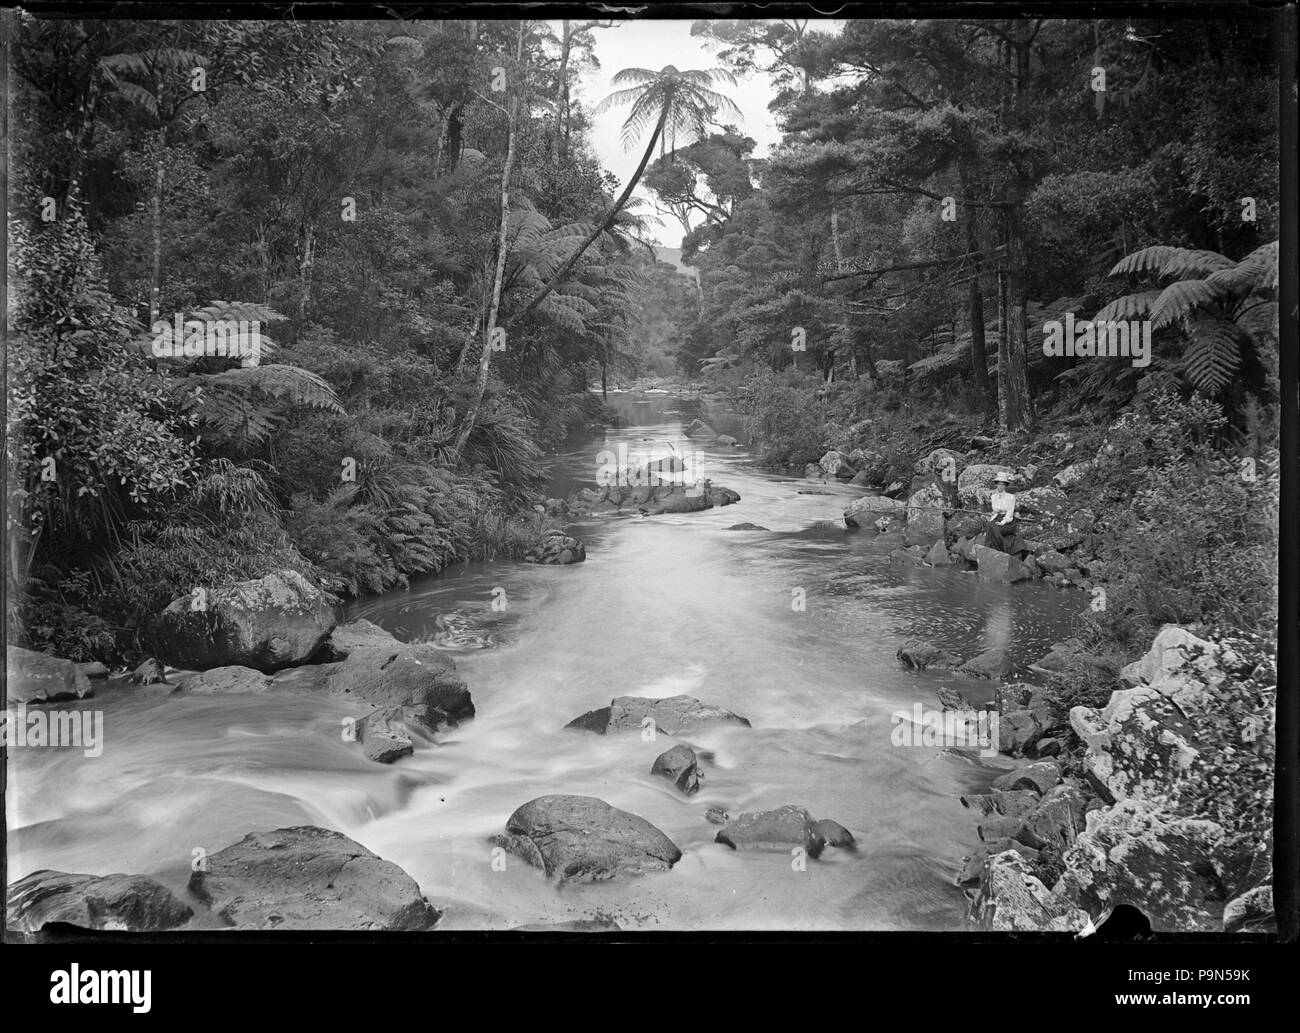 324 View of the Whangarei River (now known as the Hatea River). ATLIB 287693 Stock Photo